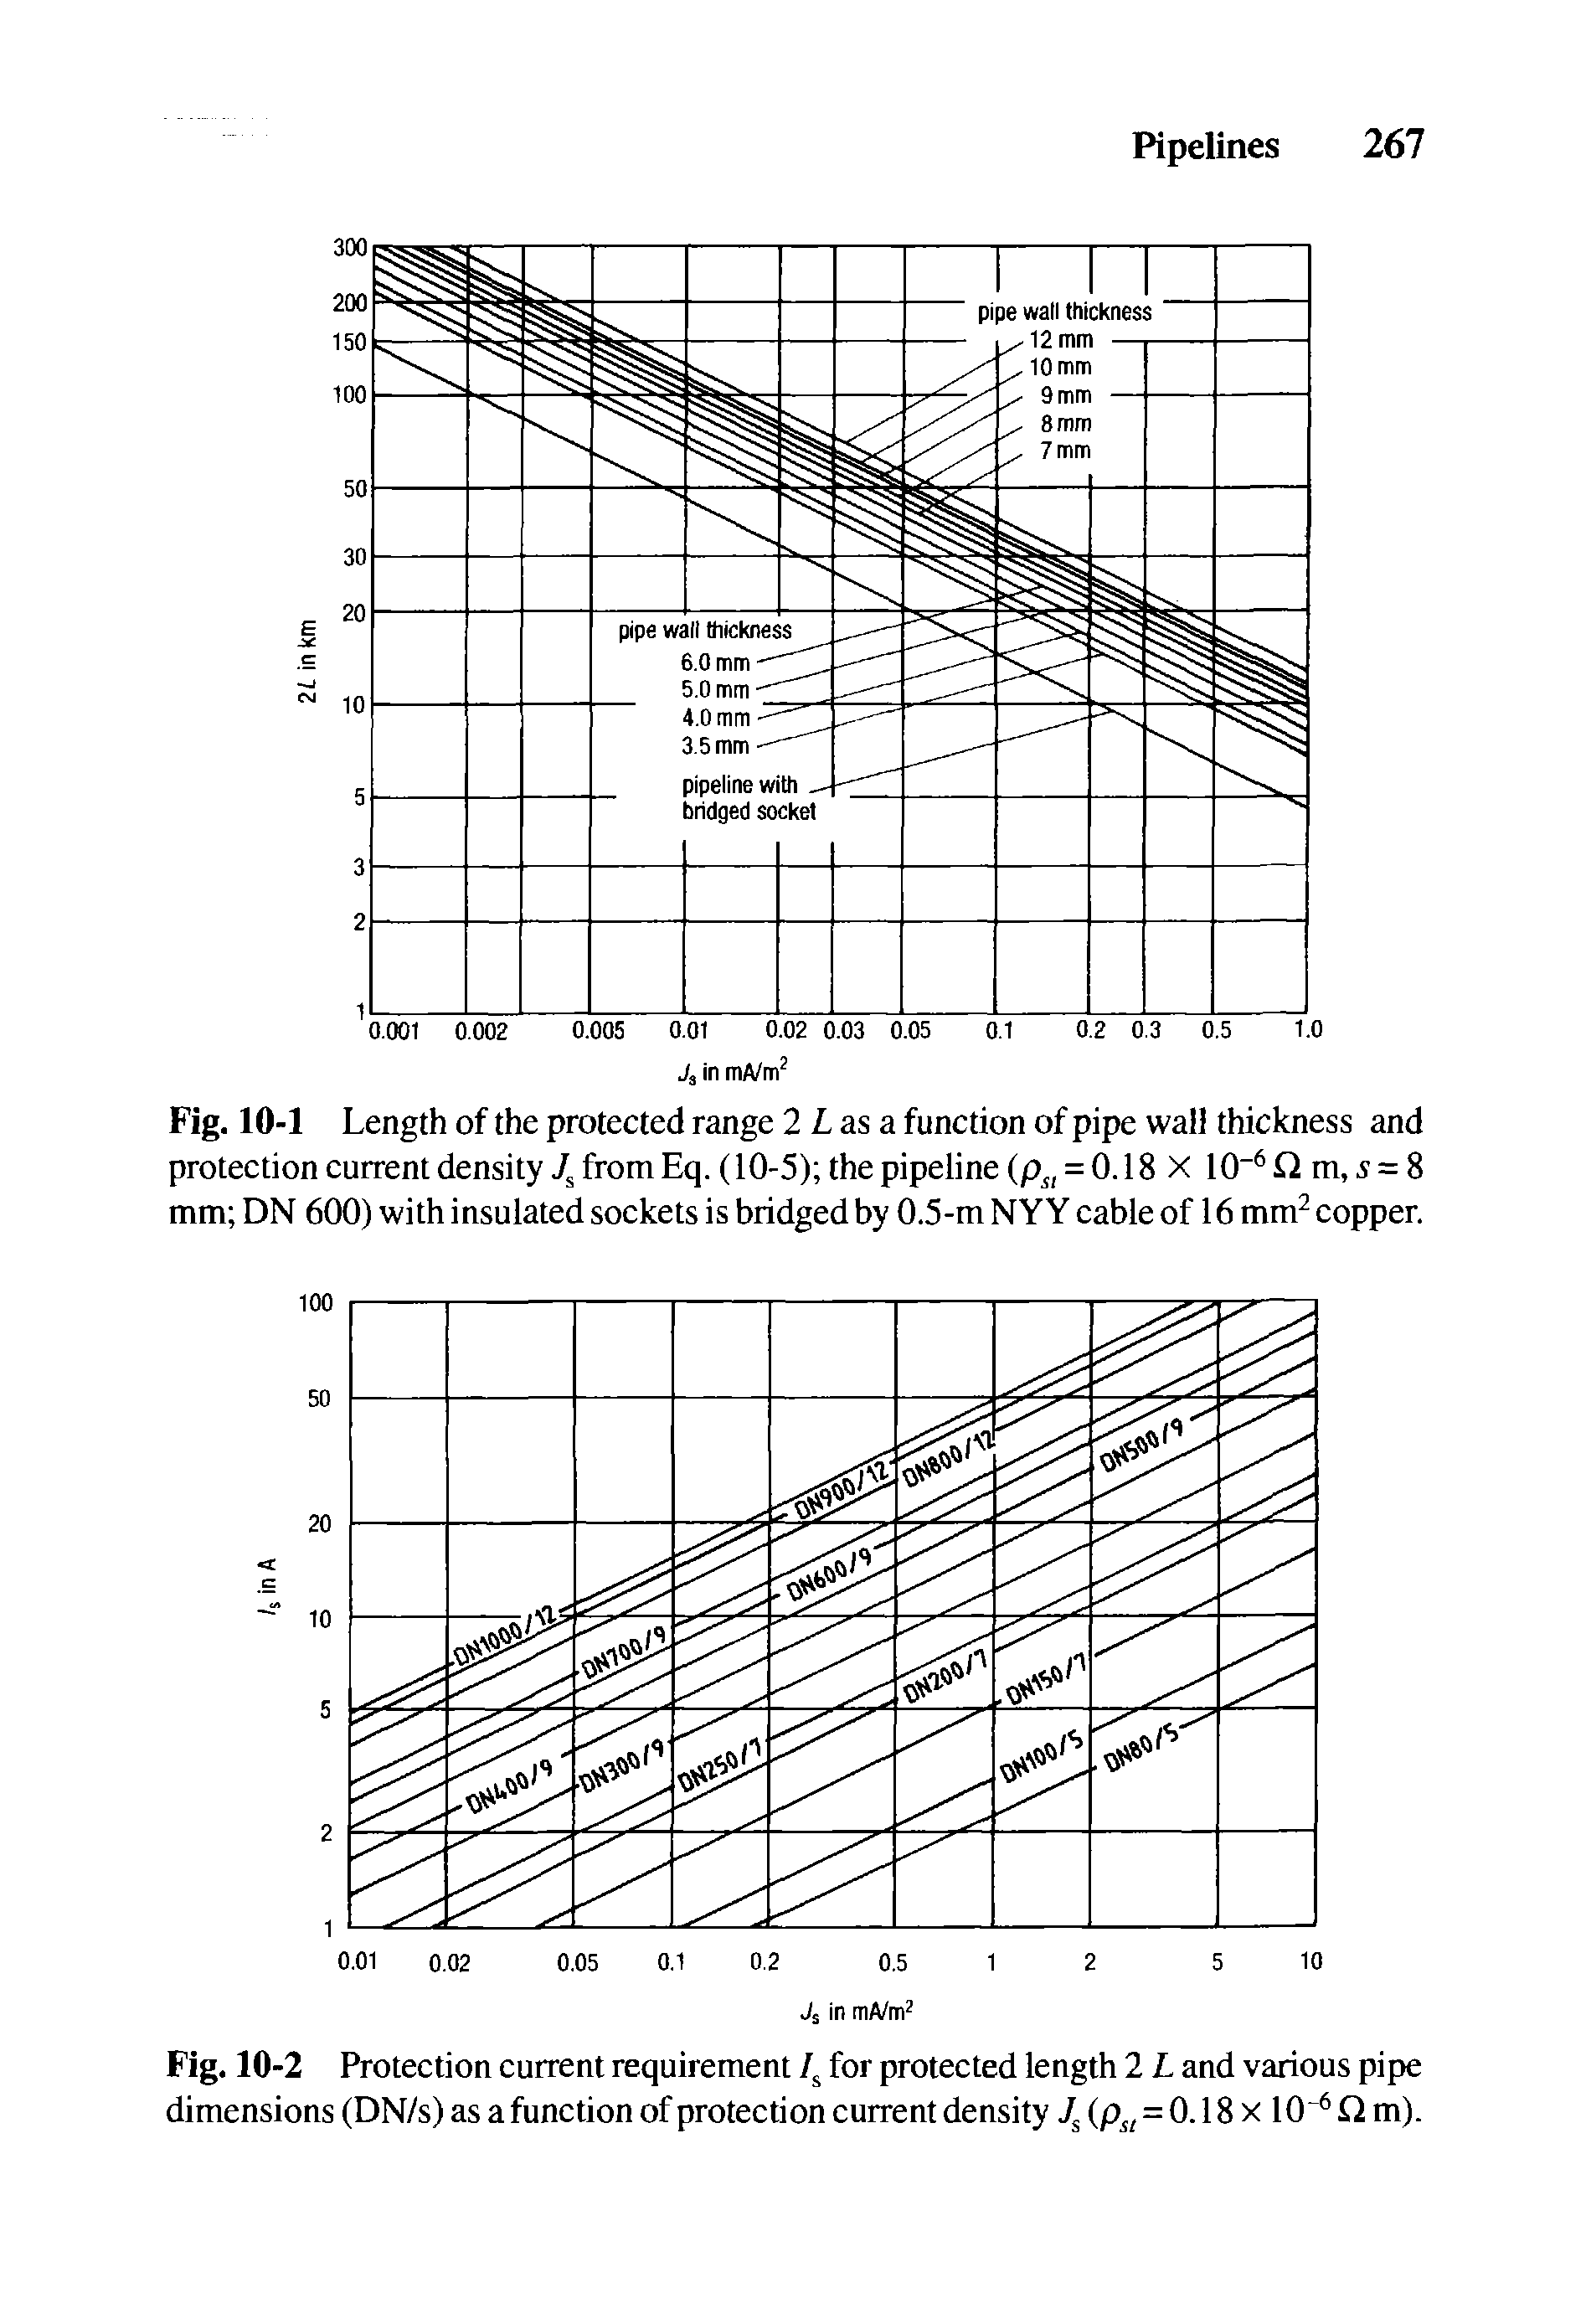 Fig. 10-2 Proteetion eurrent requirement 4 for proteeted length 2 L and various pipe dimensions (DN/s) as a funetion of proteetion eurrent density (p, = 0.18 x 10 m).